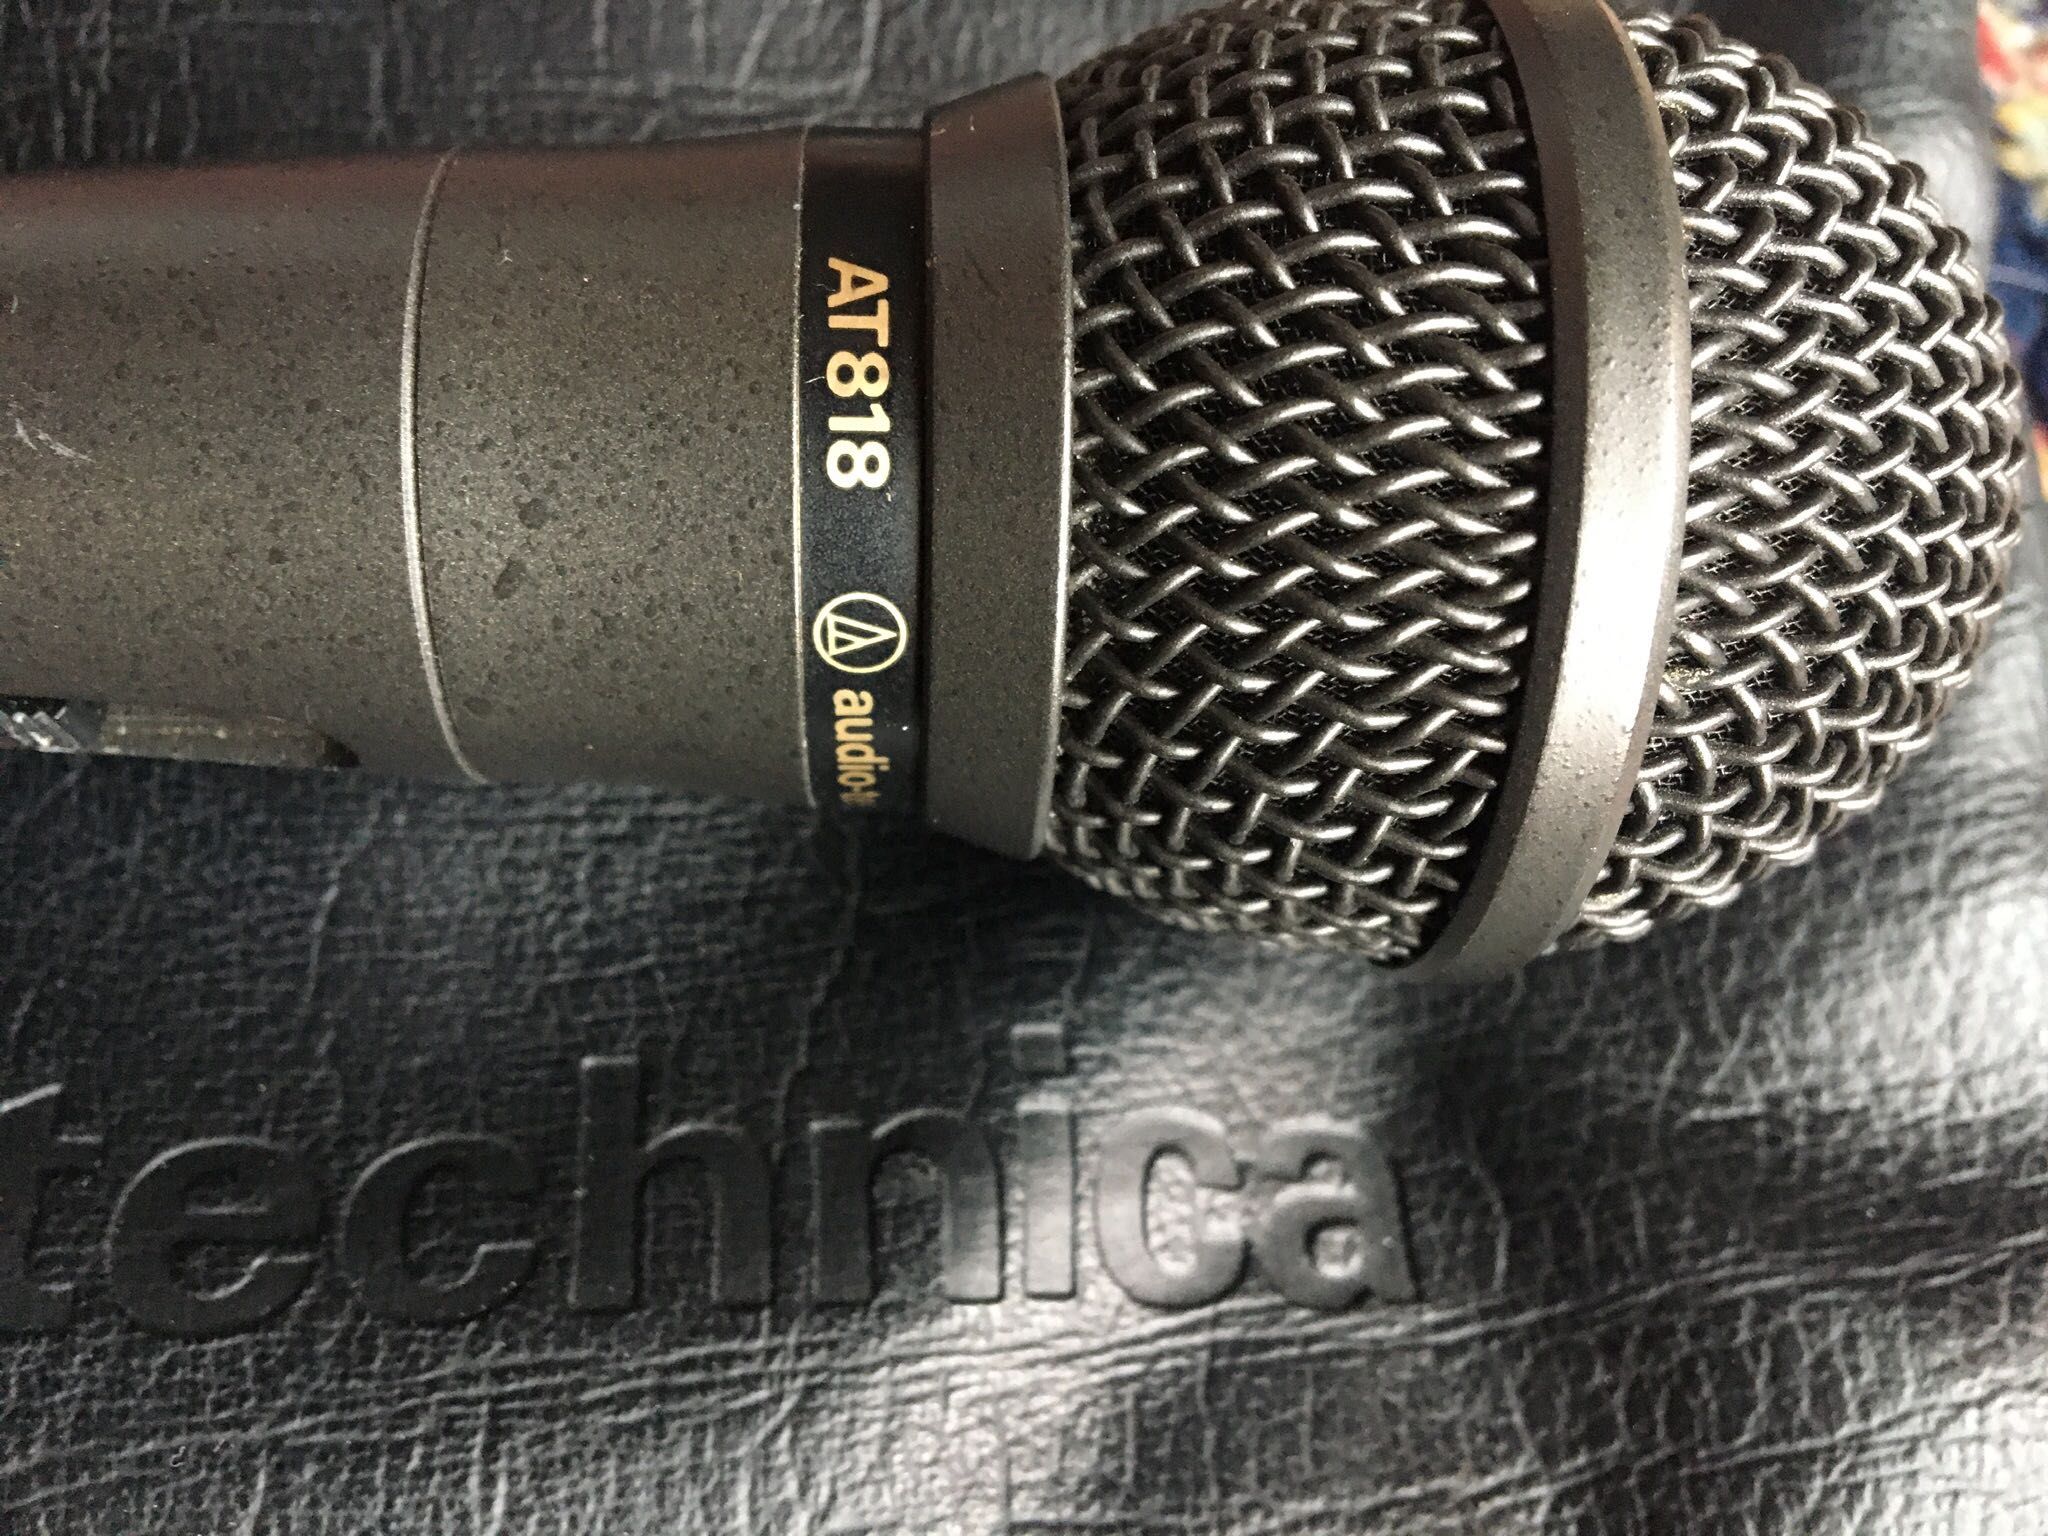 Audio-Technica AT818 dynamic unidirectional